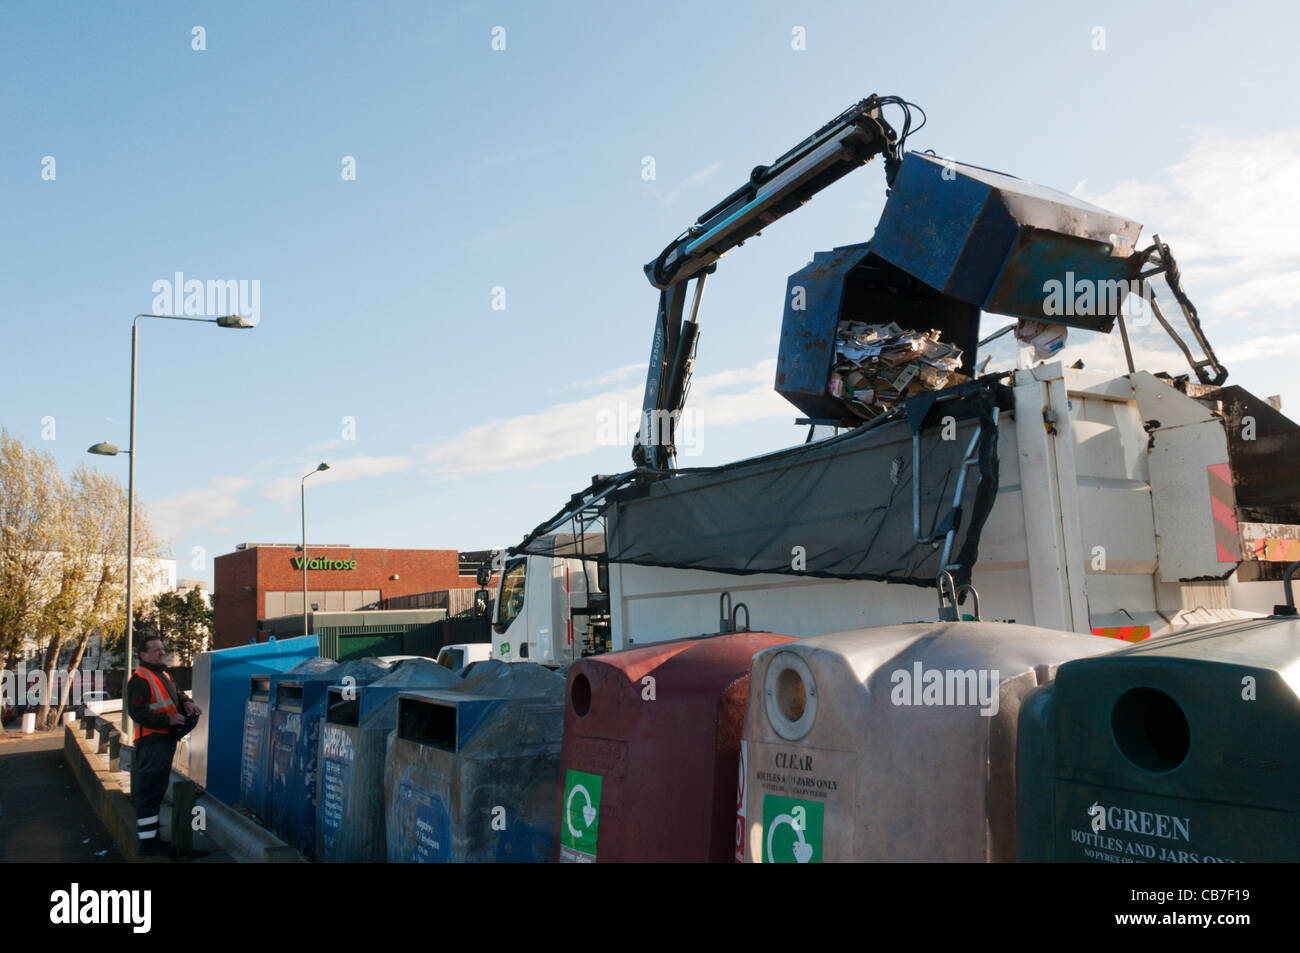 A paperbank being hoisted above a recycling lorry for emptying Stock Photo